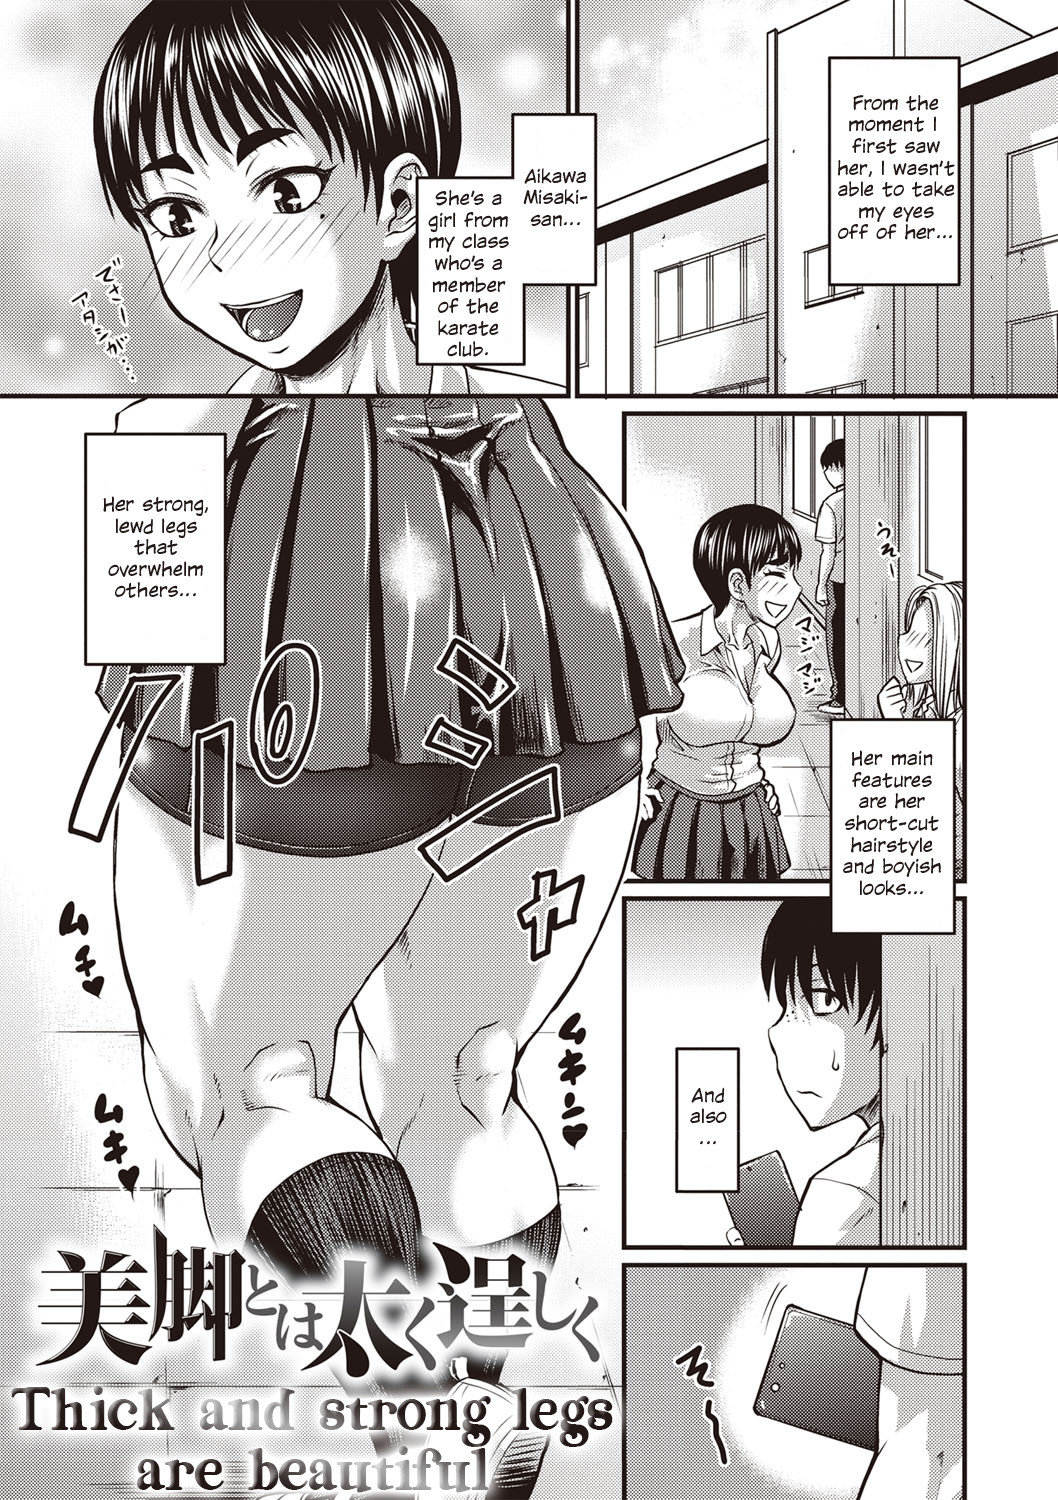 Hentai Manga Comic-Thick and Strong Legs are Beautiful-Read-1